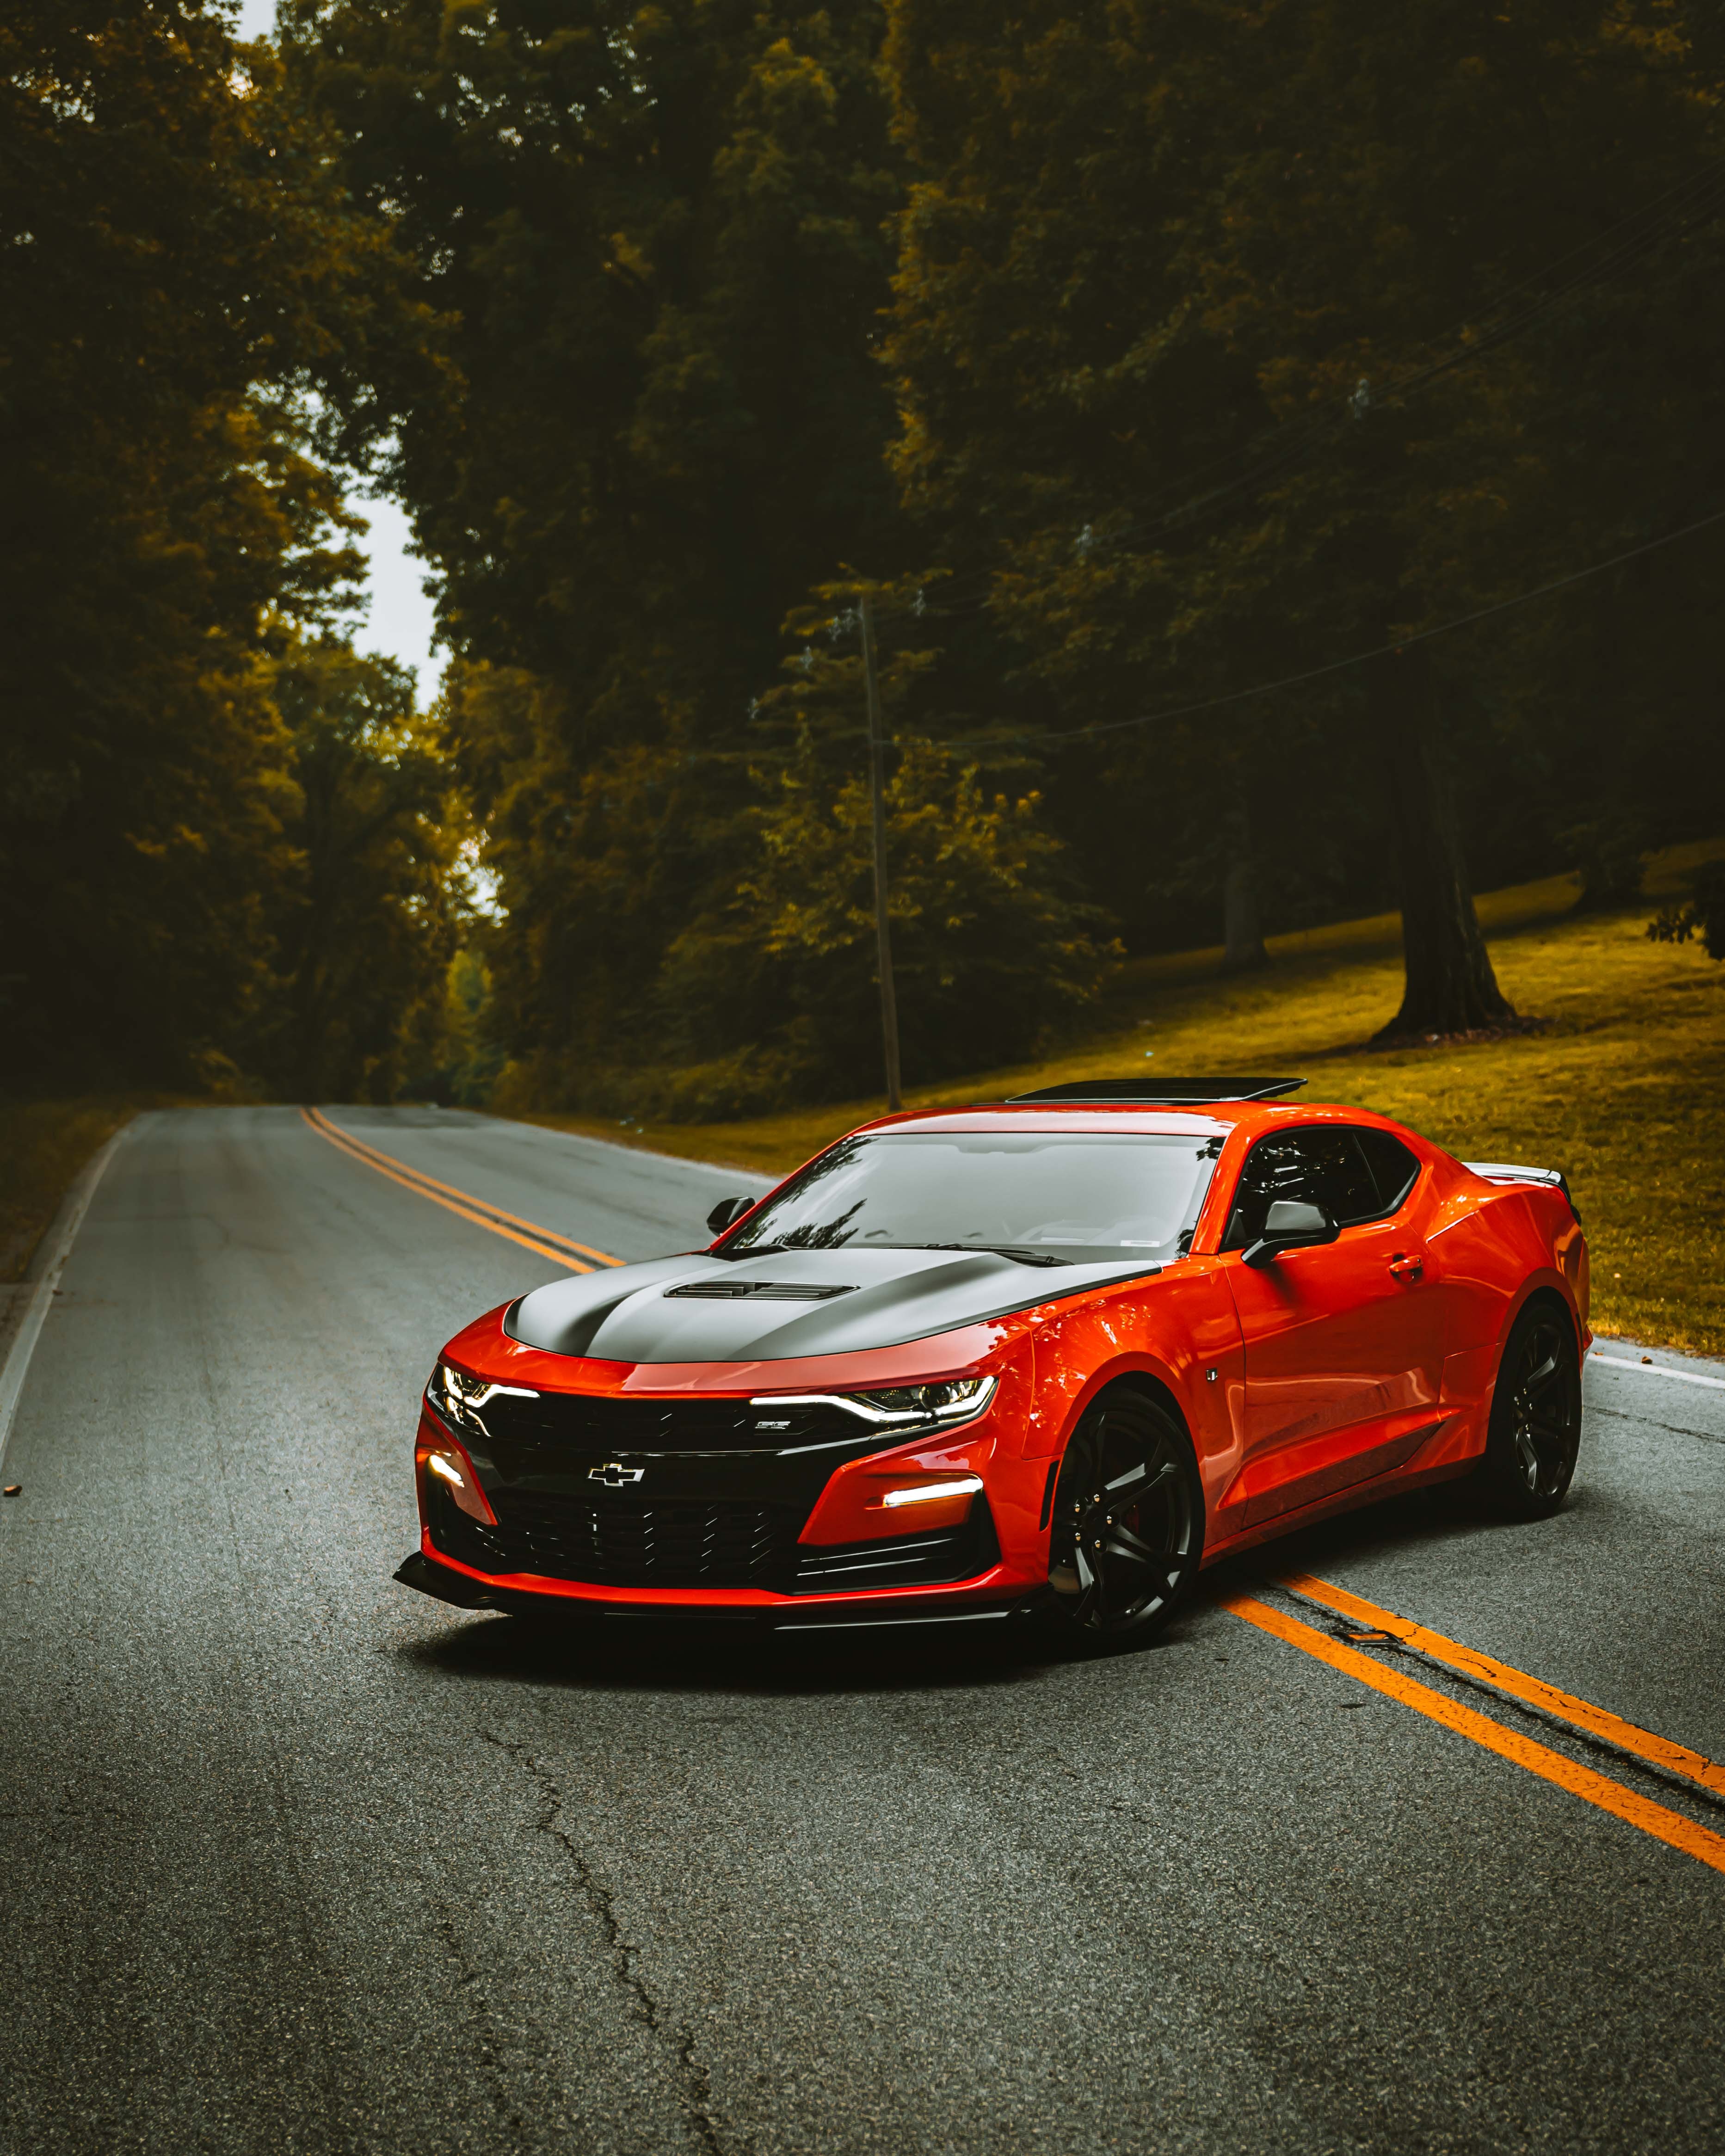 cars, chevrolet, chevrolet camaro, sports car, machine, car, sports, red, road wallpaper for mobile